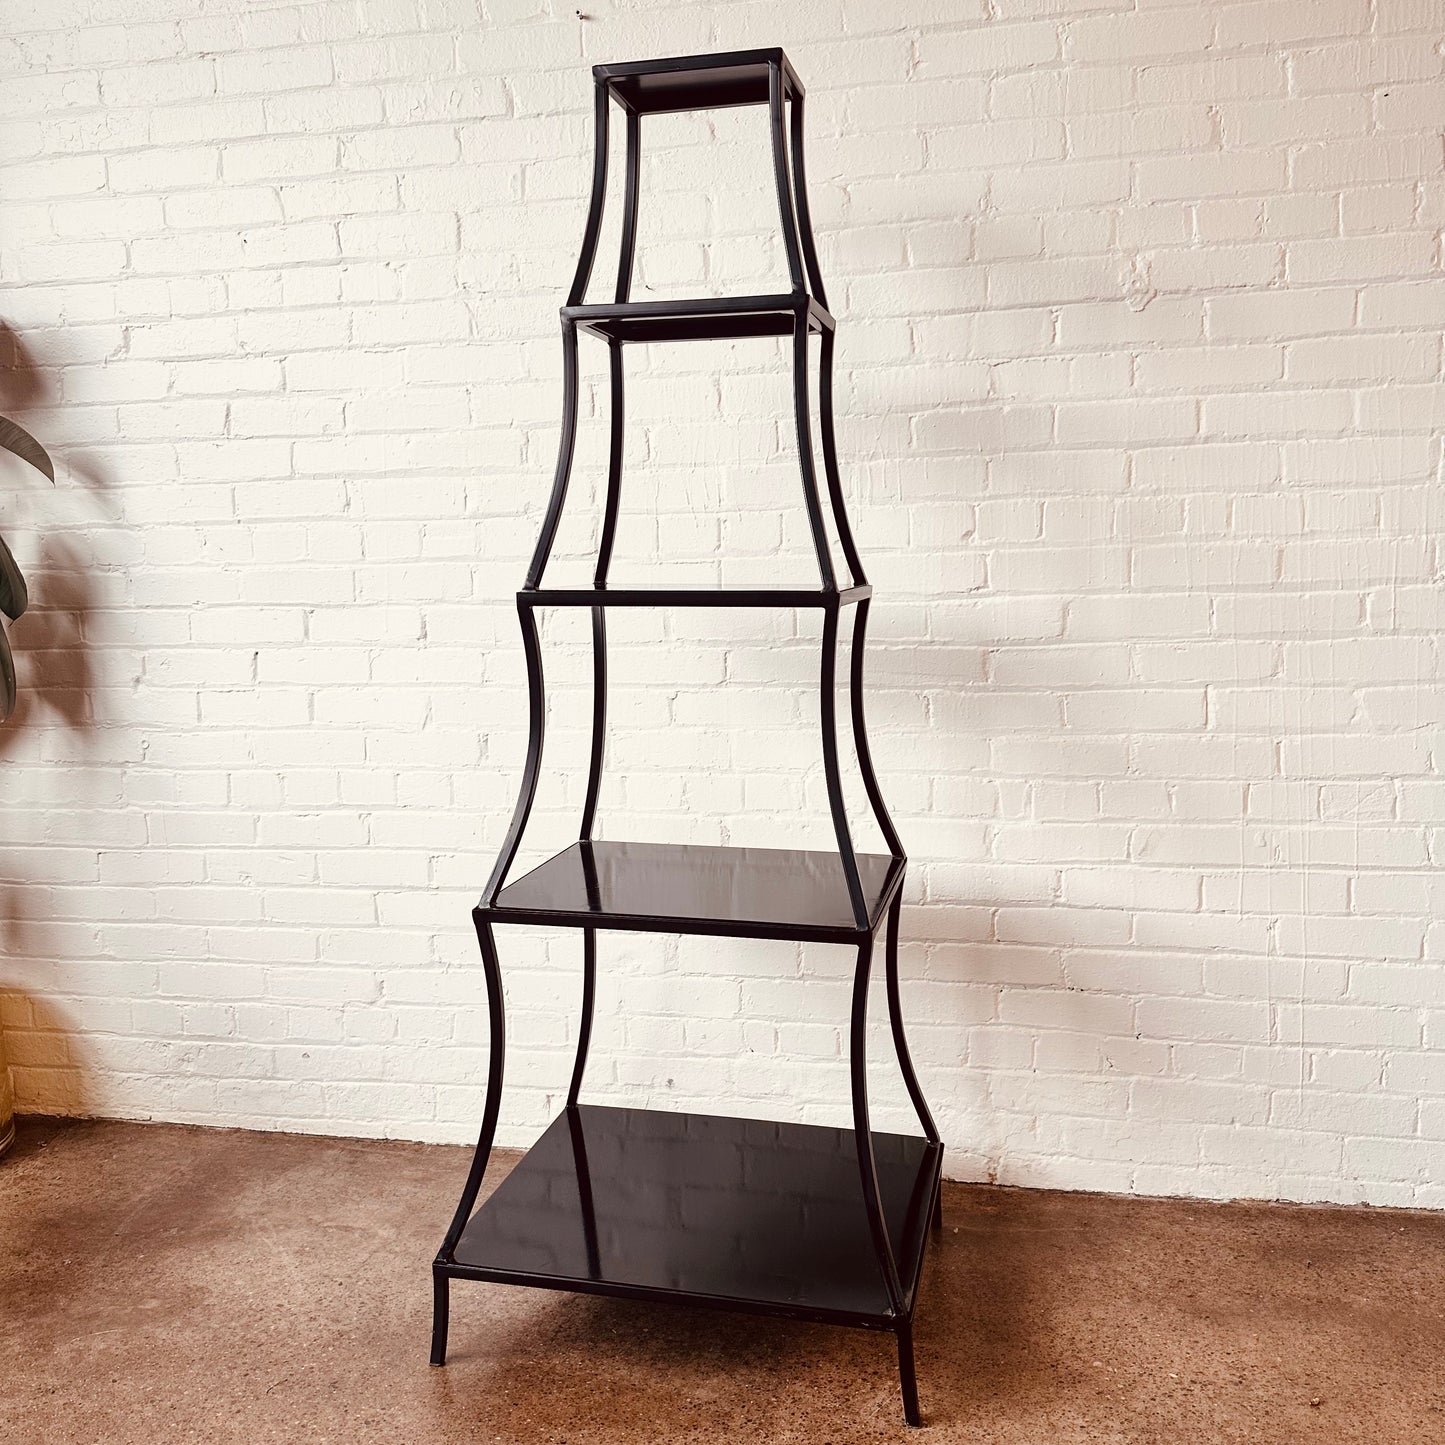 METAL ETAGERE WITH 5 OPEN SHELVES IN PAGODA STYLE